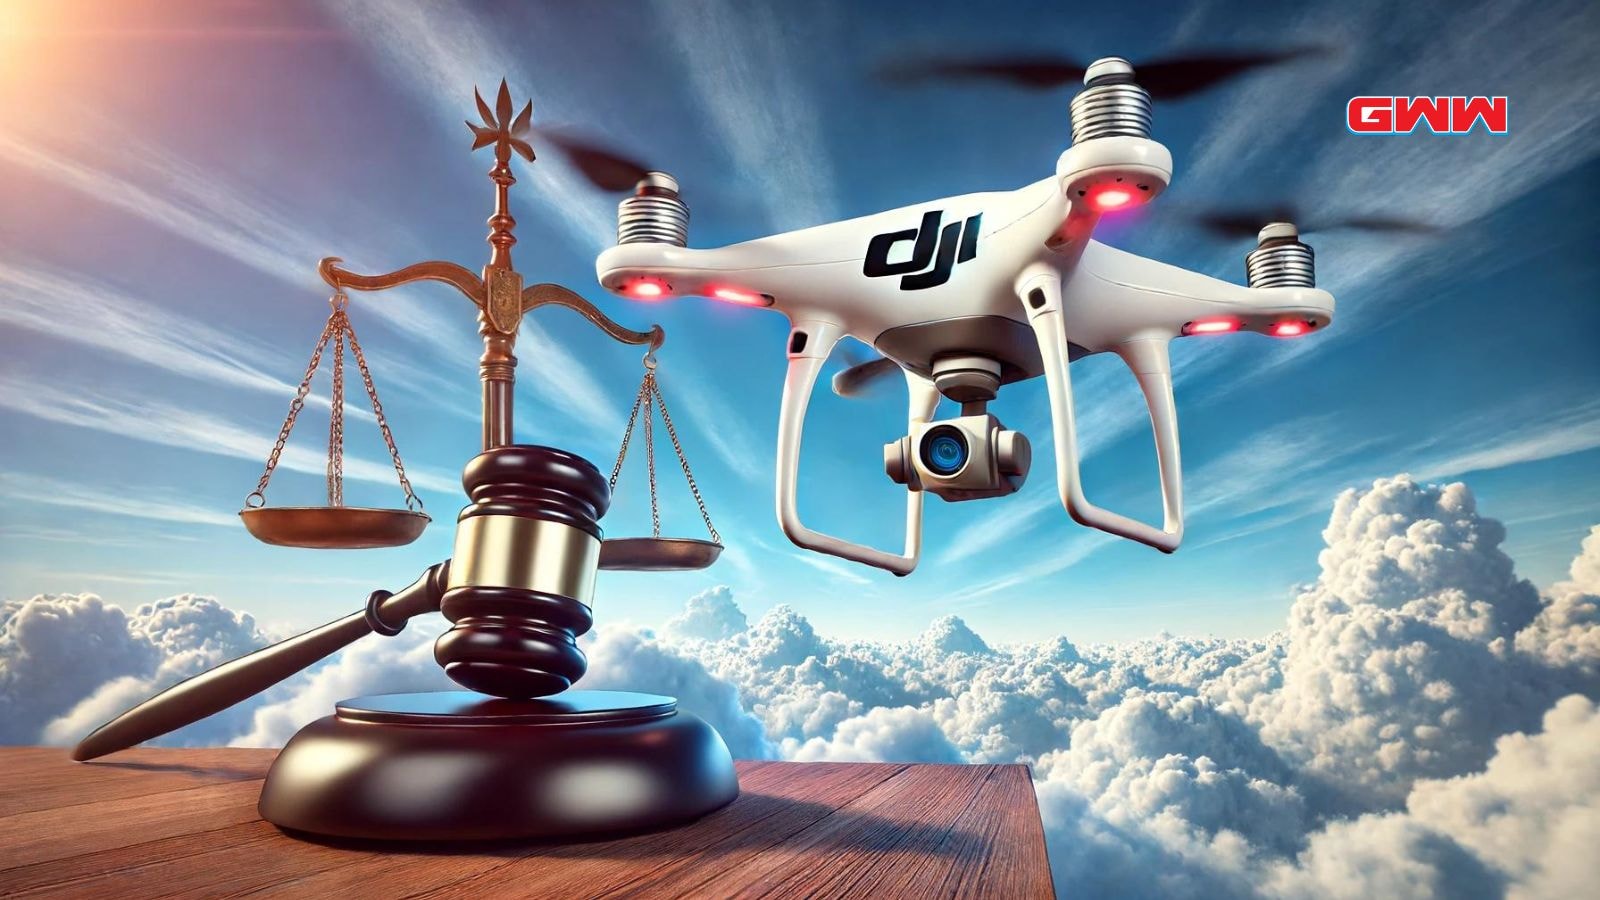 A wide image featuring a DJI drone flying in a clear blue sky, with a gavel and scales of justice in the background